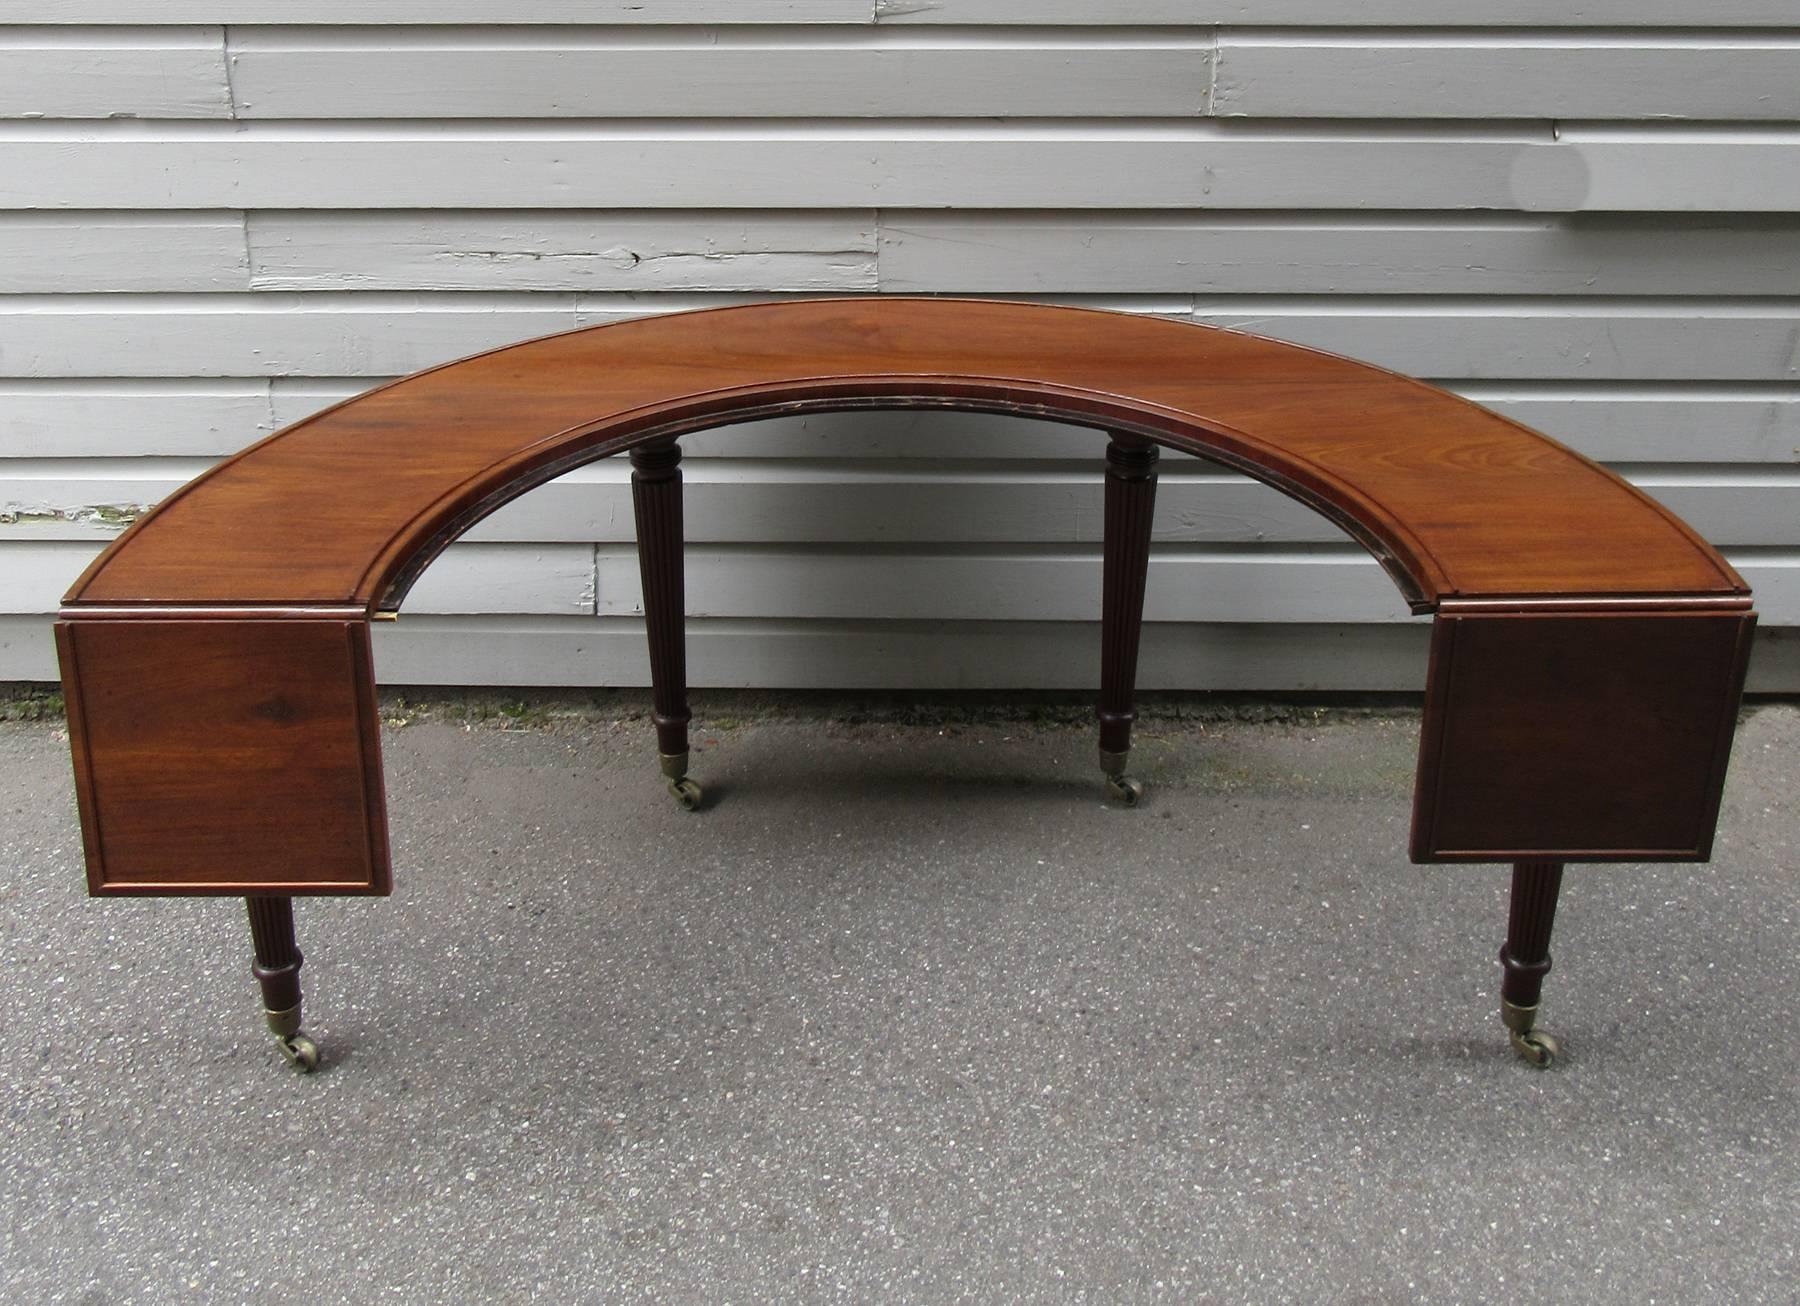 Early 19th Century English Regency Mahogany Social Table Attributed to Gillows For Sale 2